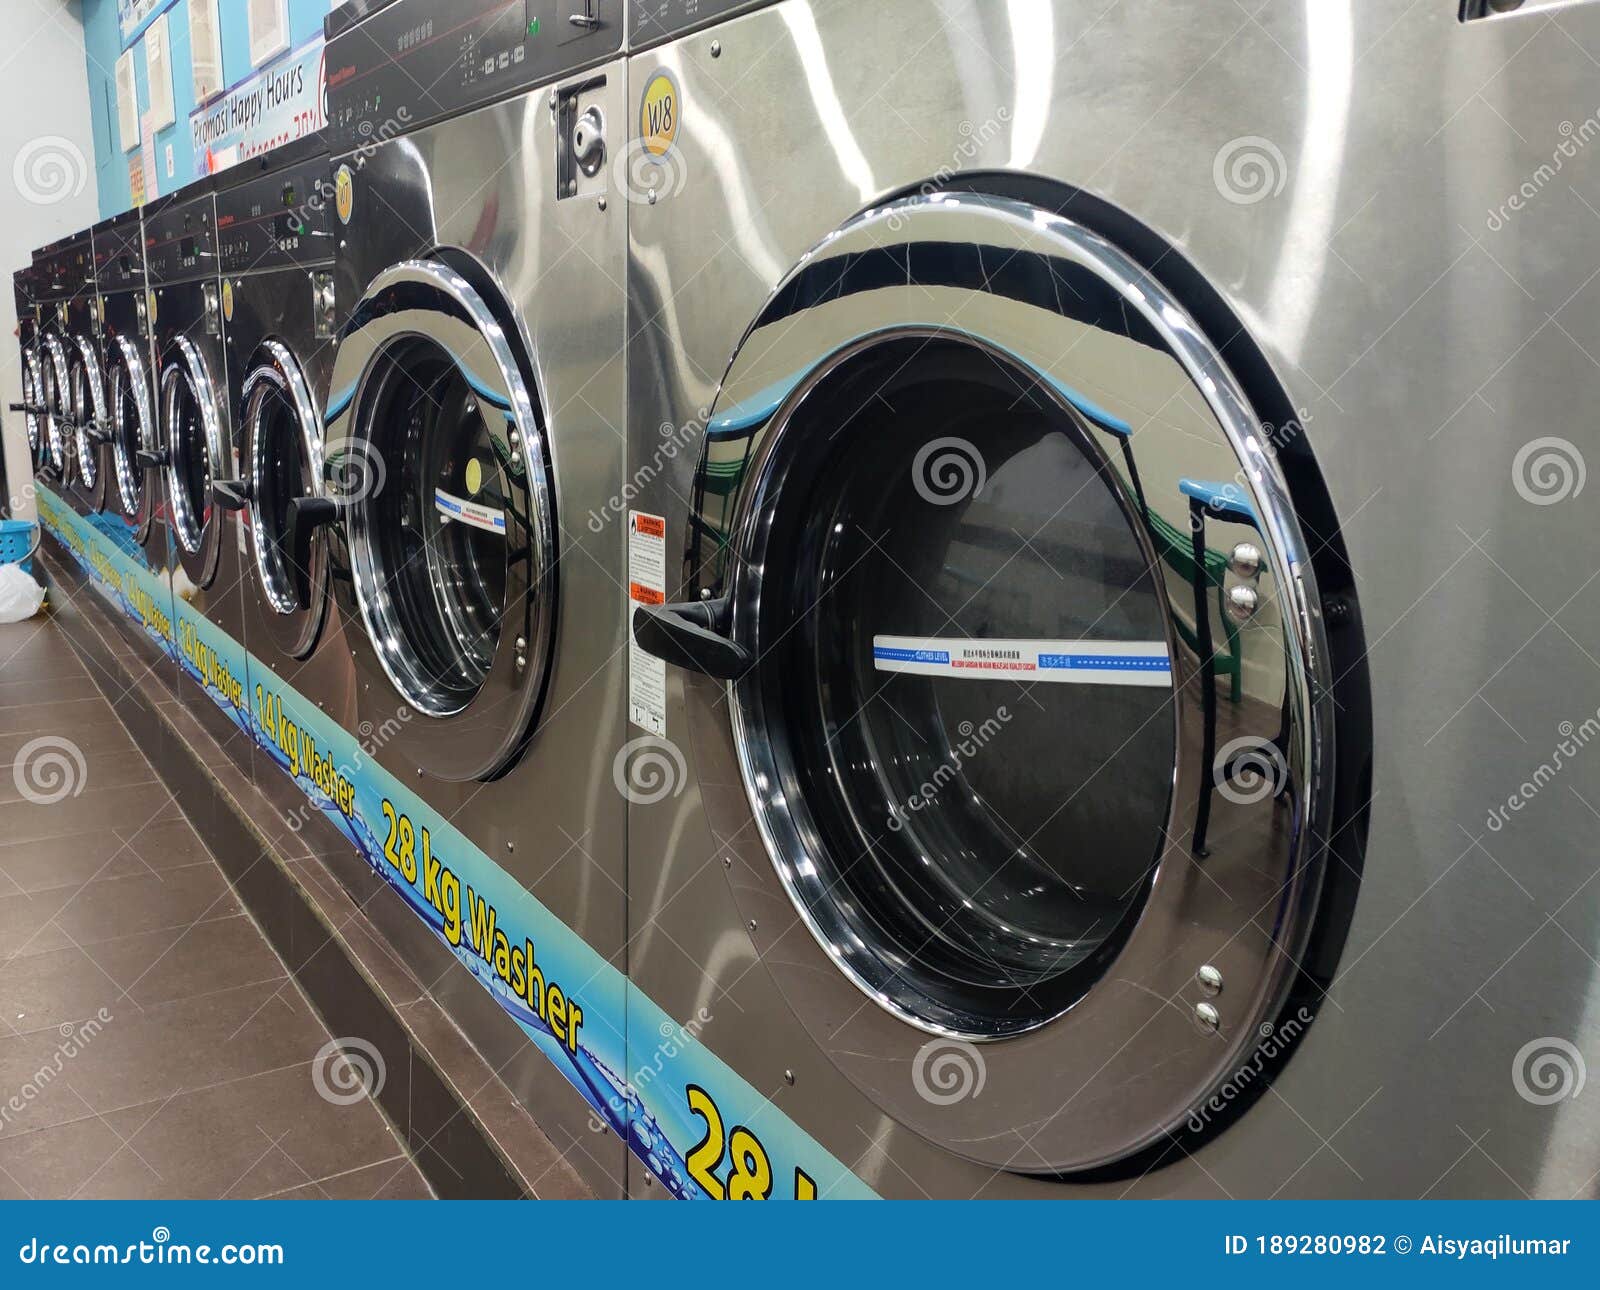 laundry-machines-outlet-provides-self-service-drying-open-hours-kuala-lumpur-malaysia-march-189280982.jpg